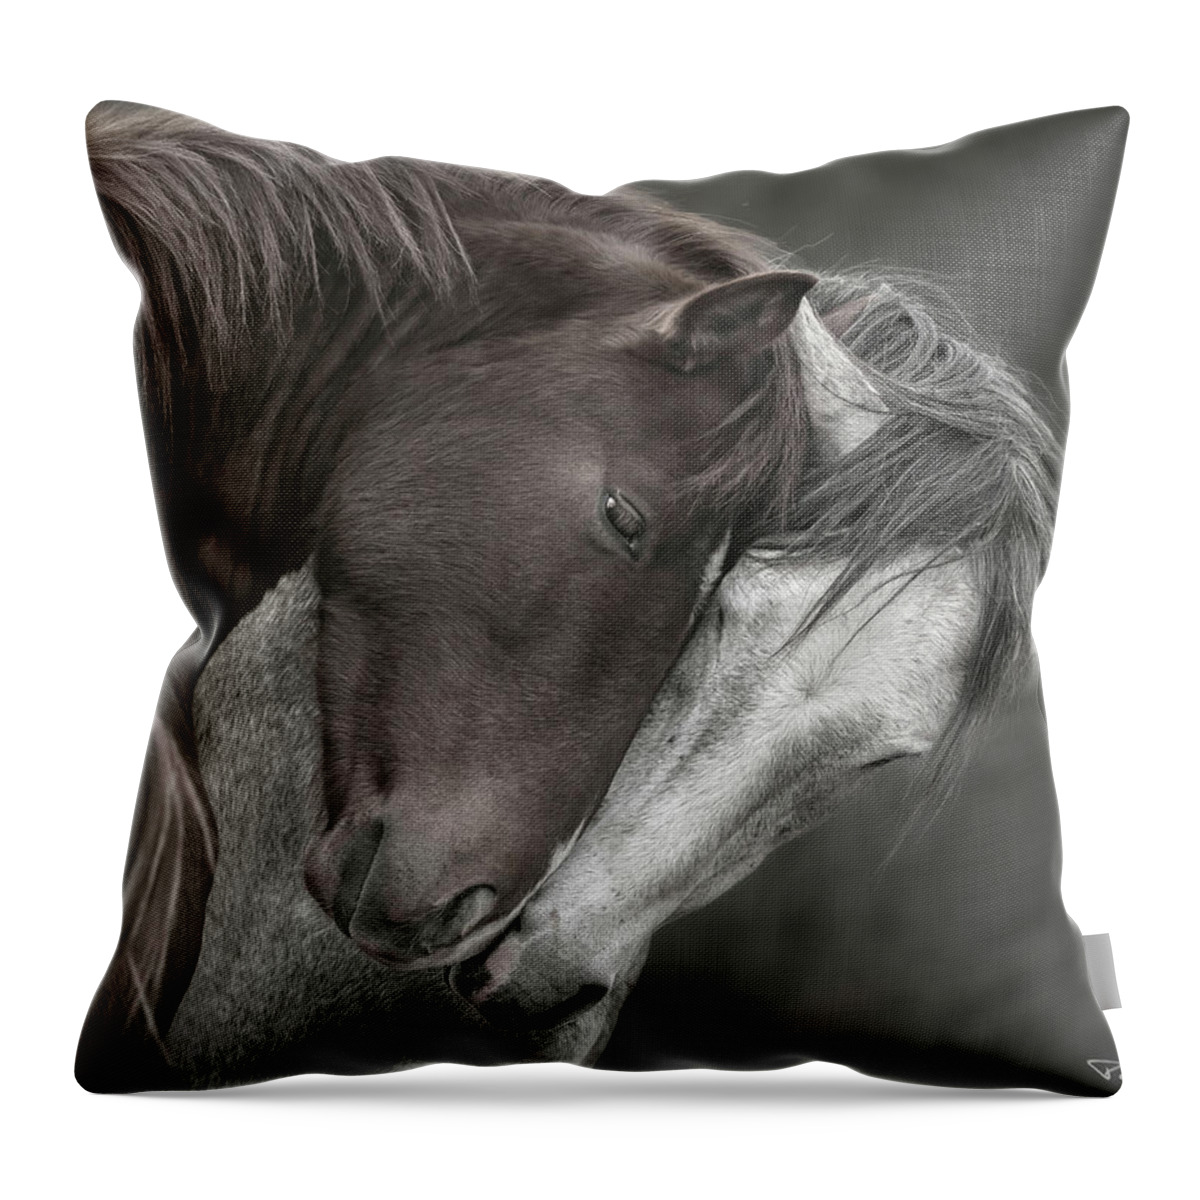 Stallion Throw Pillow featuring the photograph Greetings. by Paul Martin